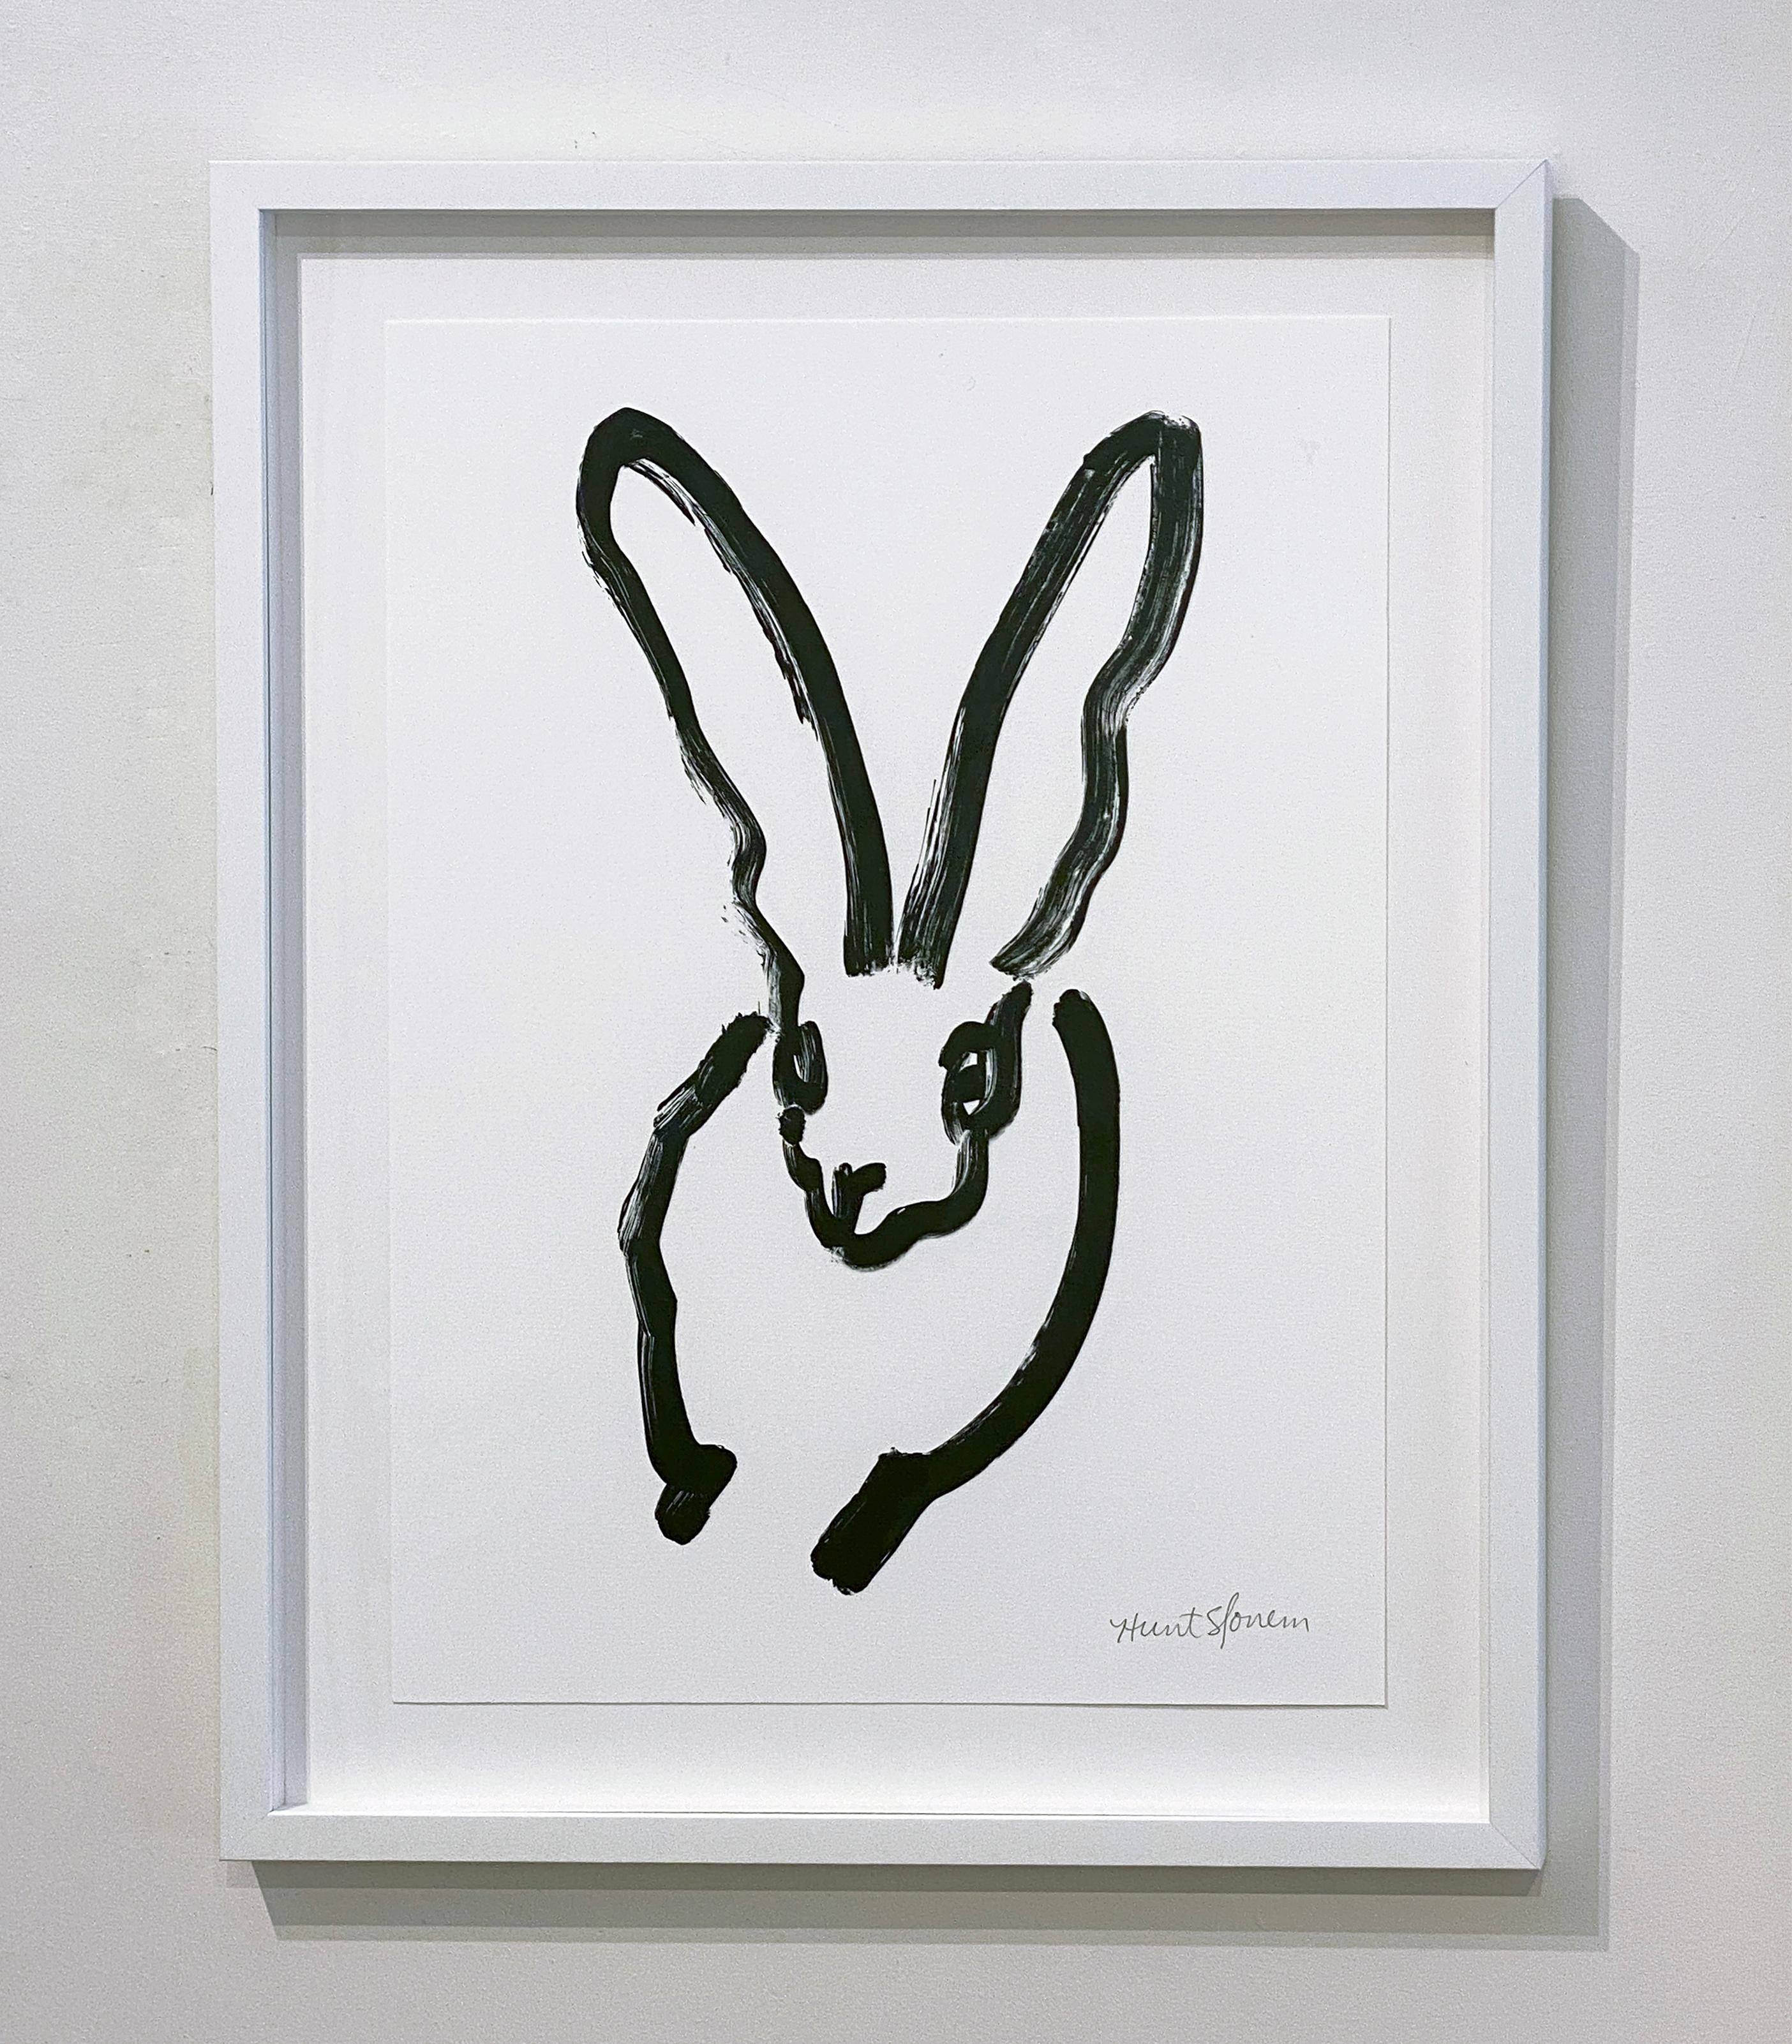 Artist:  Slonem, Hunt
Title:  BW Bunny 3
Series:  Bunnies
Date:  2018
Medium:  Lithograph on Paper
Unframed Dimensions:  24